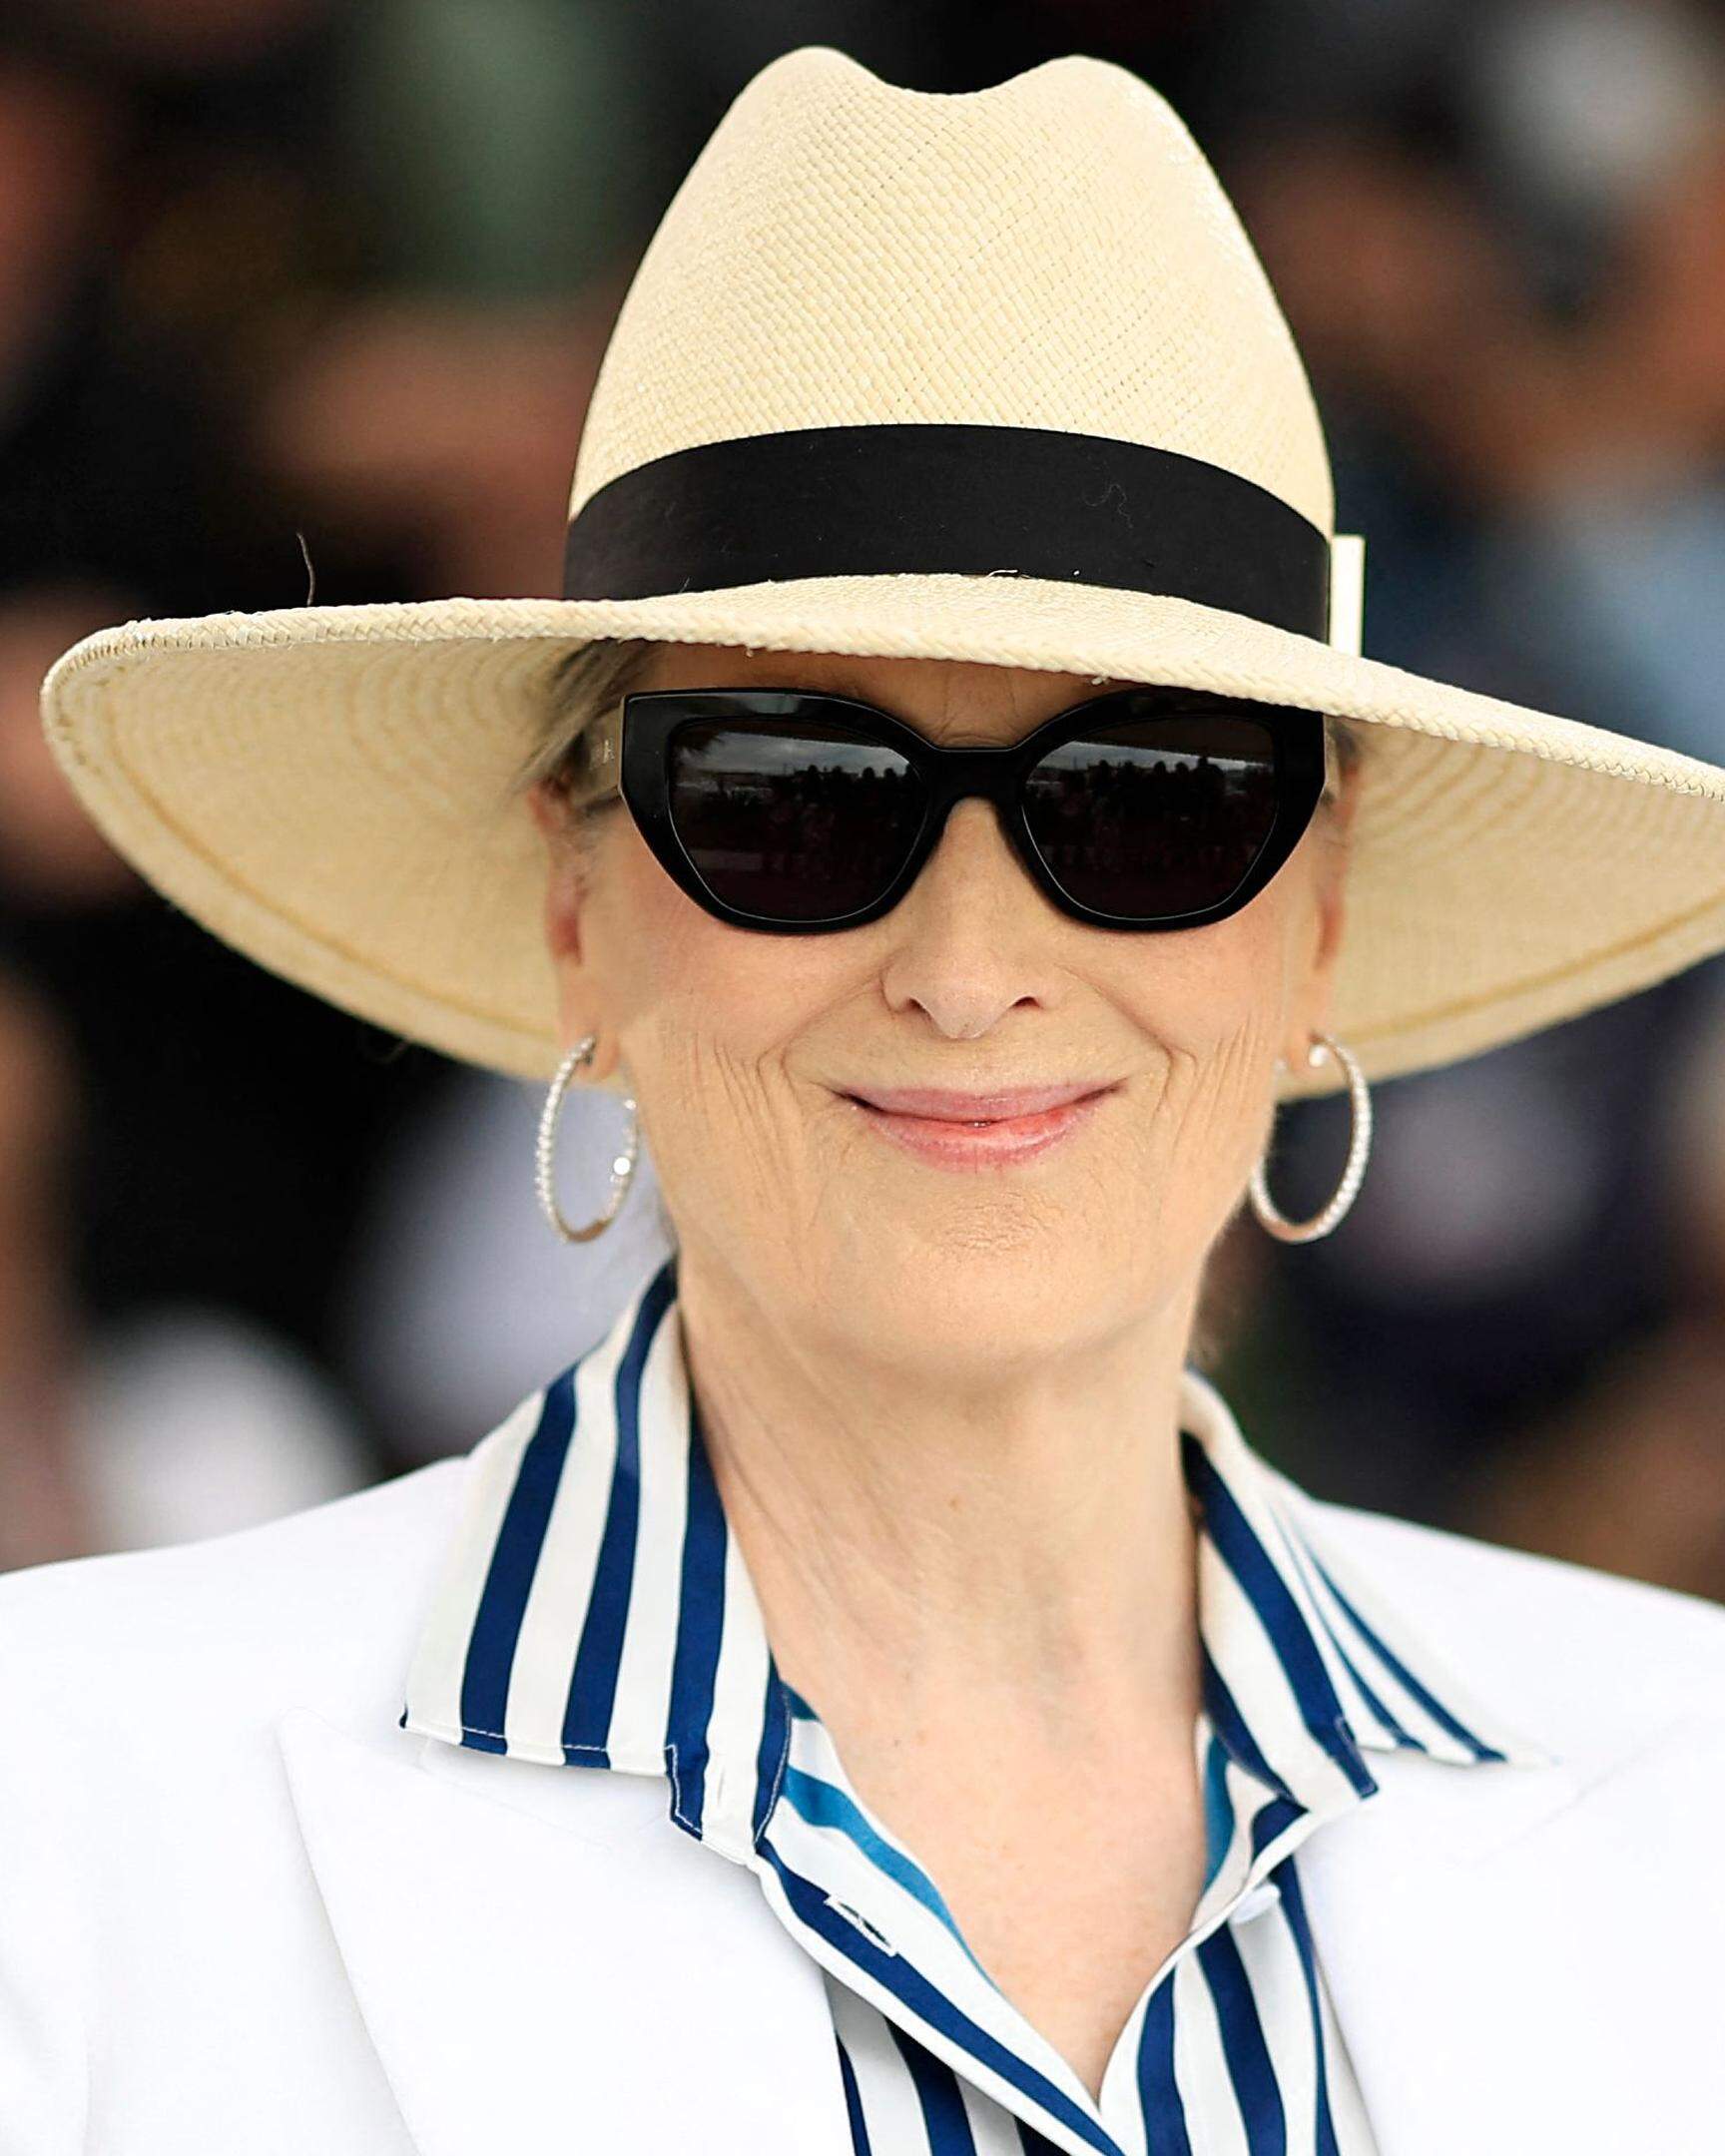 US actress Meryl Streep poses during a photocall before receiving the Honorary Palme d'Or at the 77th edition of the Cannes Film Festival in Cannes, southern France, on May 14, 2024. (Photo by Valery HACHE / AFP)